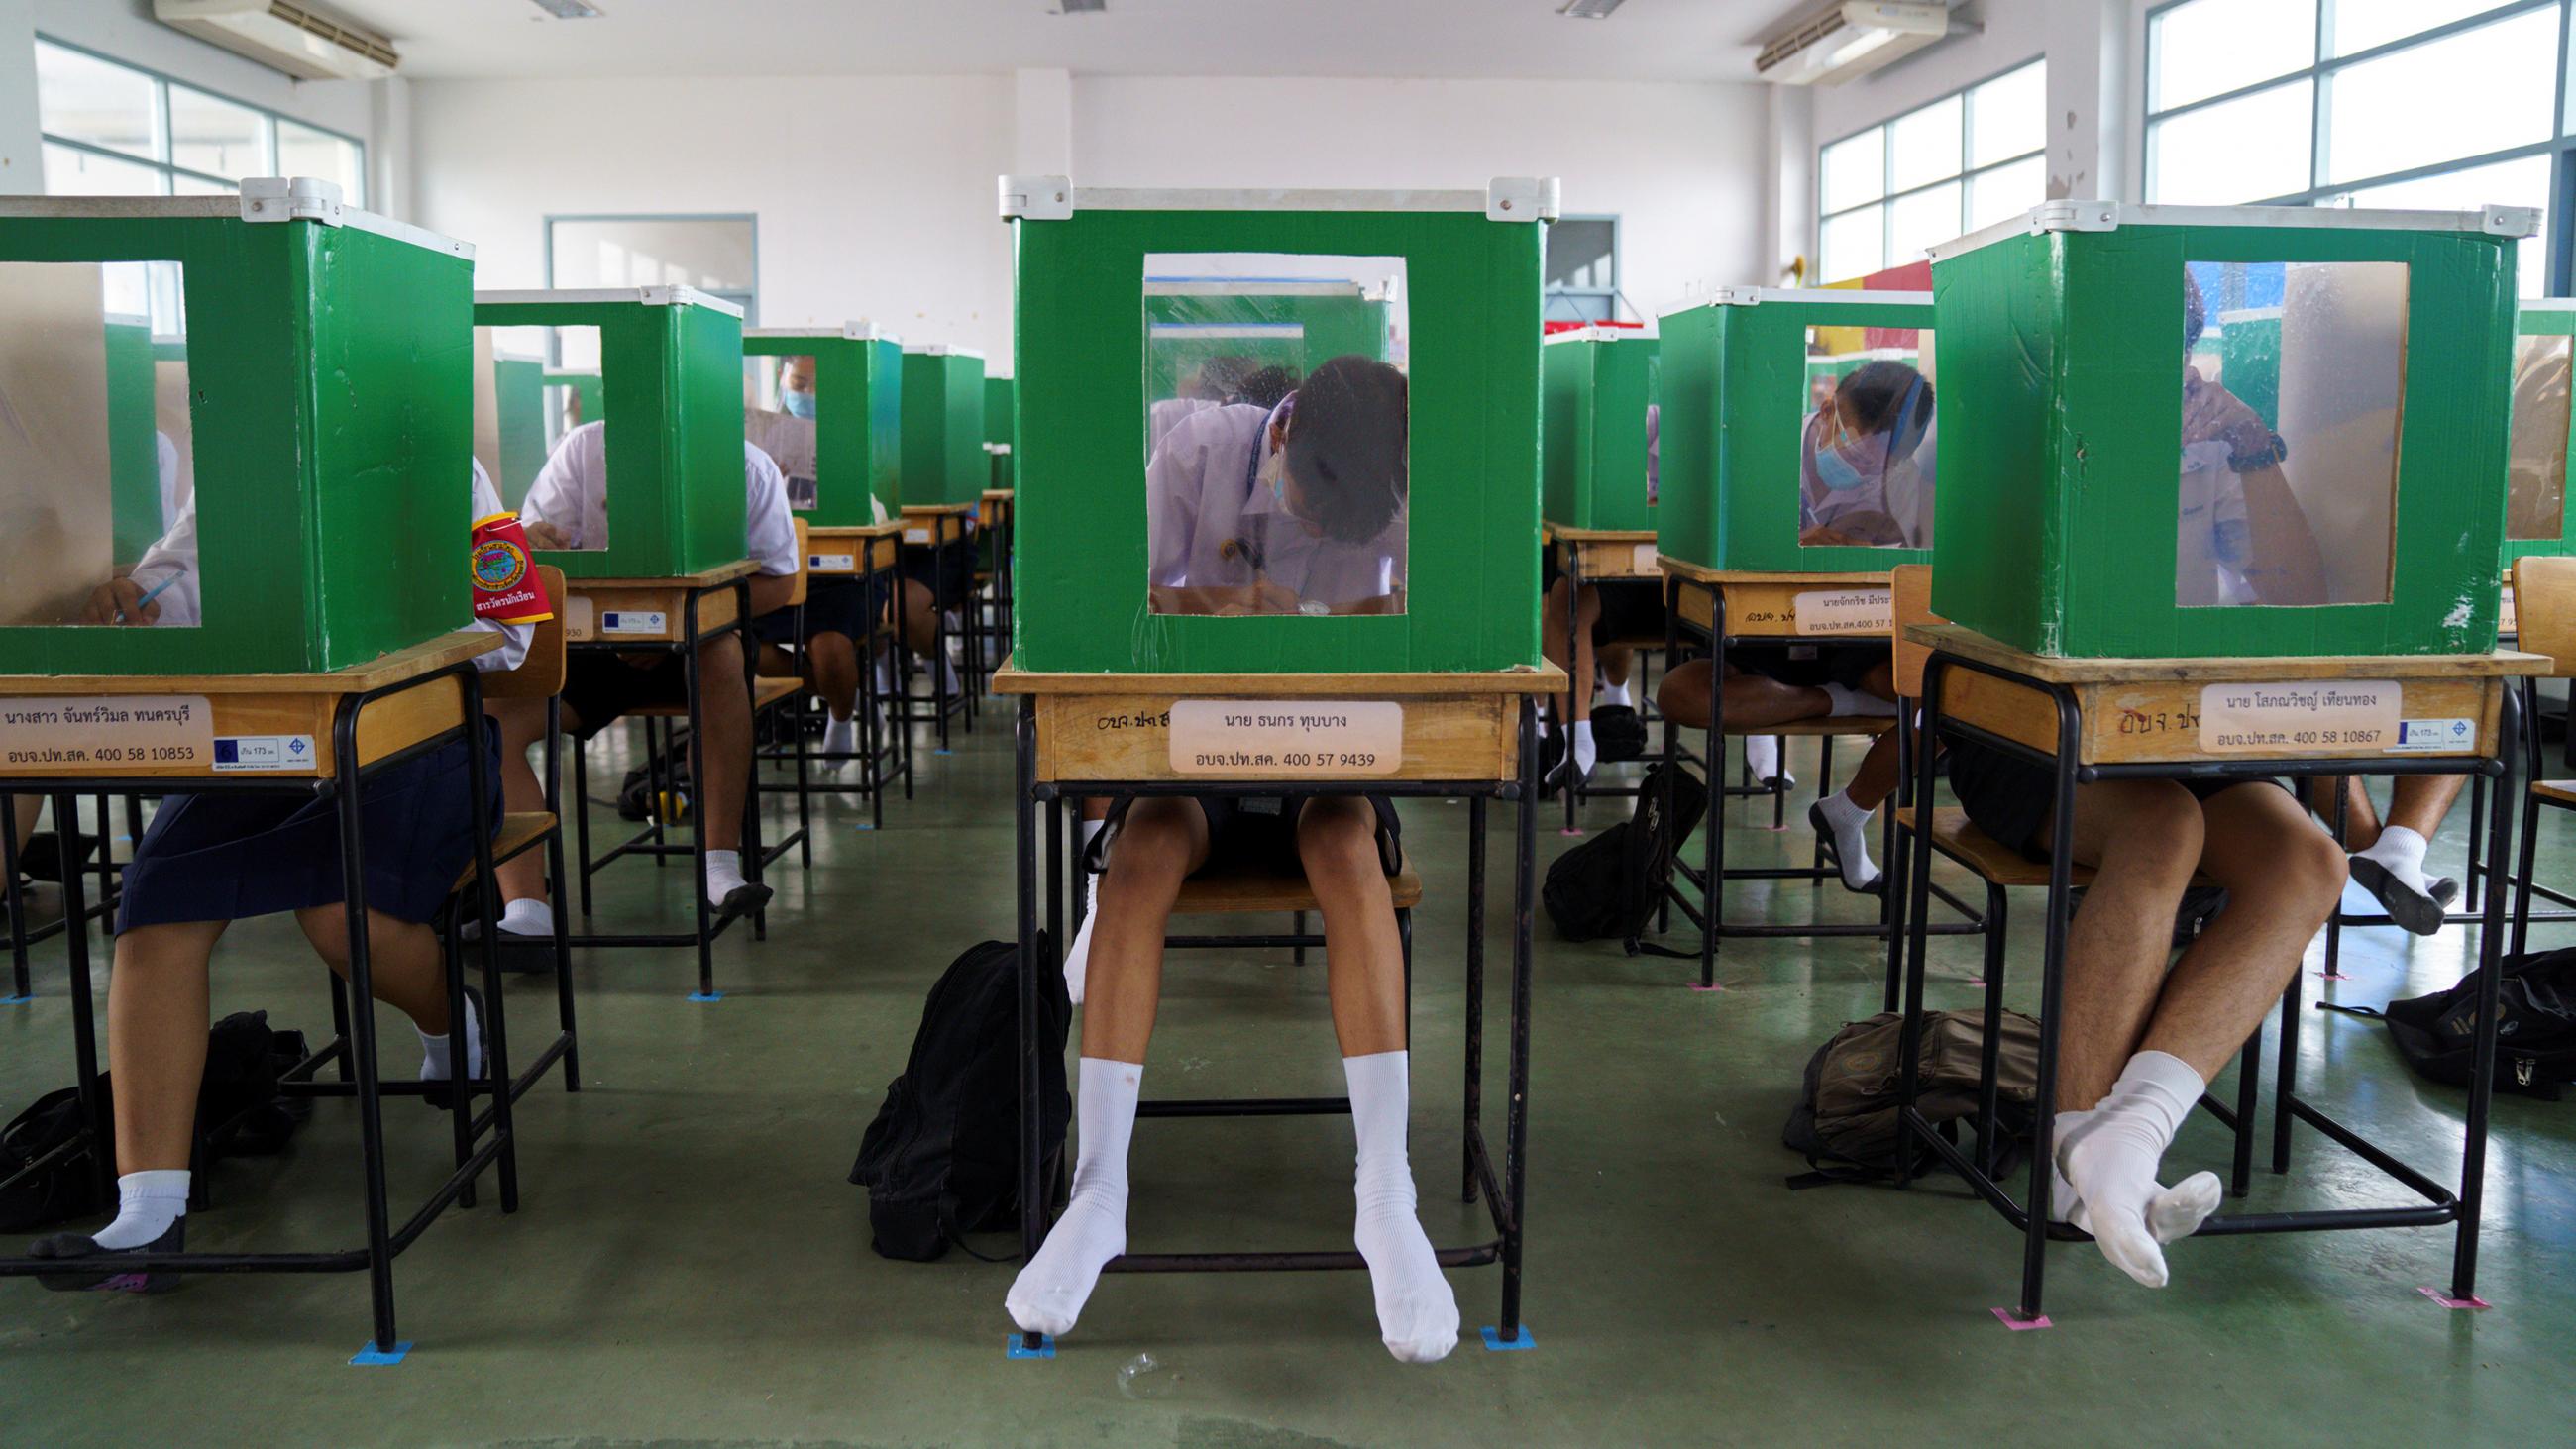 The photo shows a classroom where all the students are inside their own ballot boxes. 